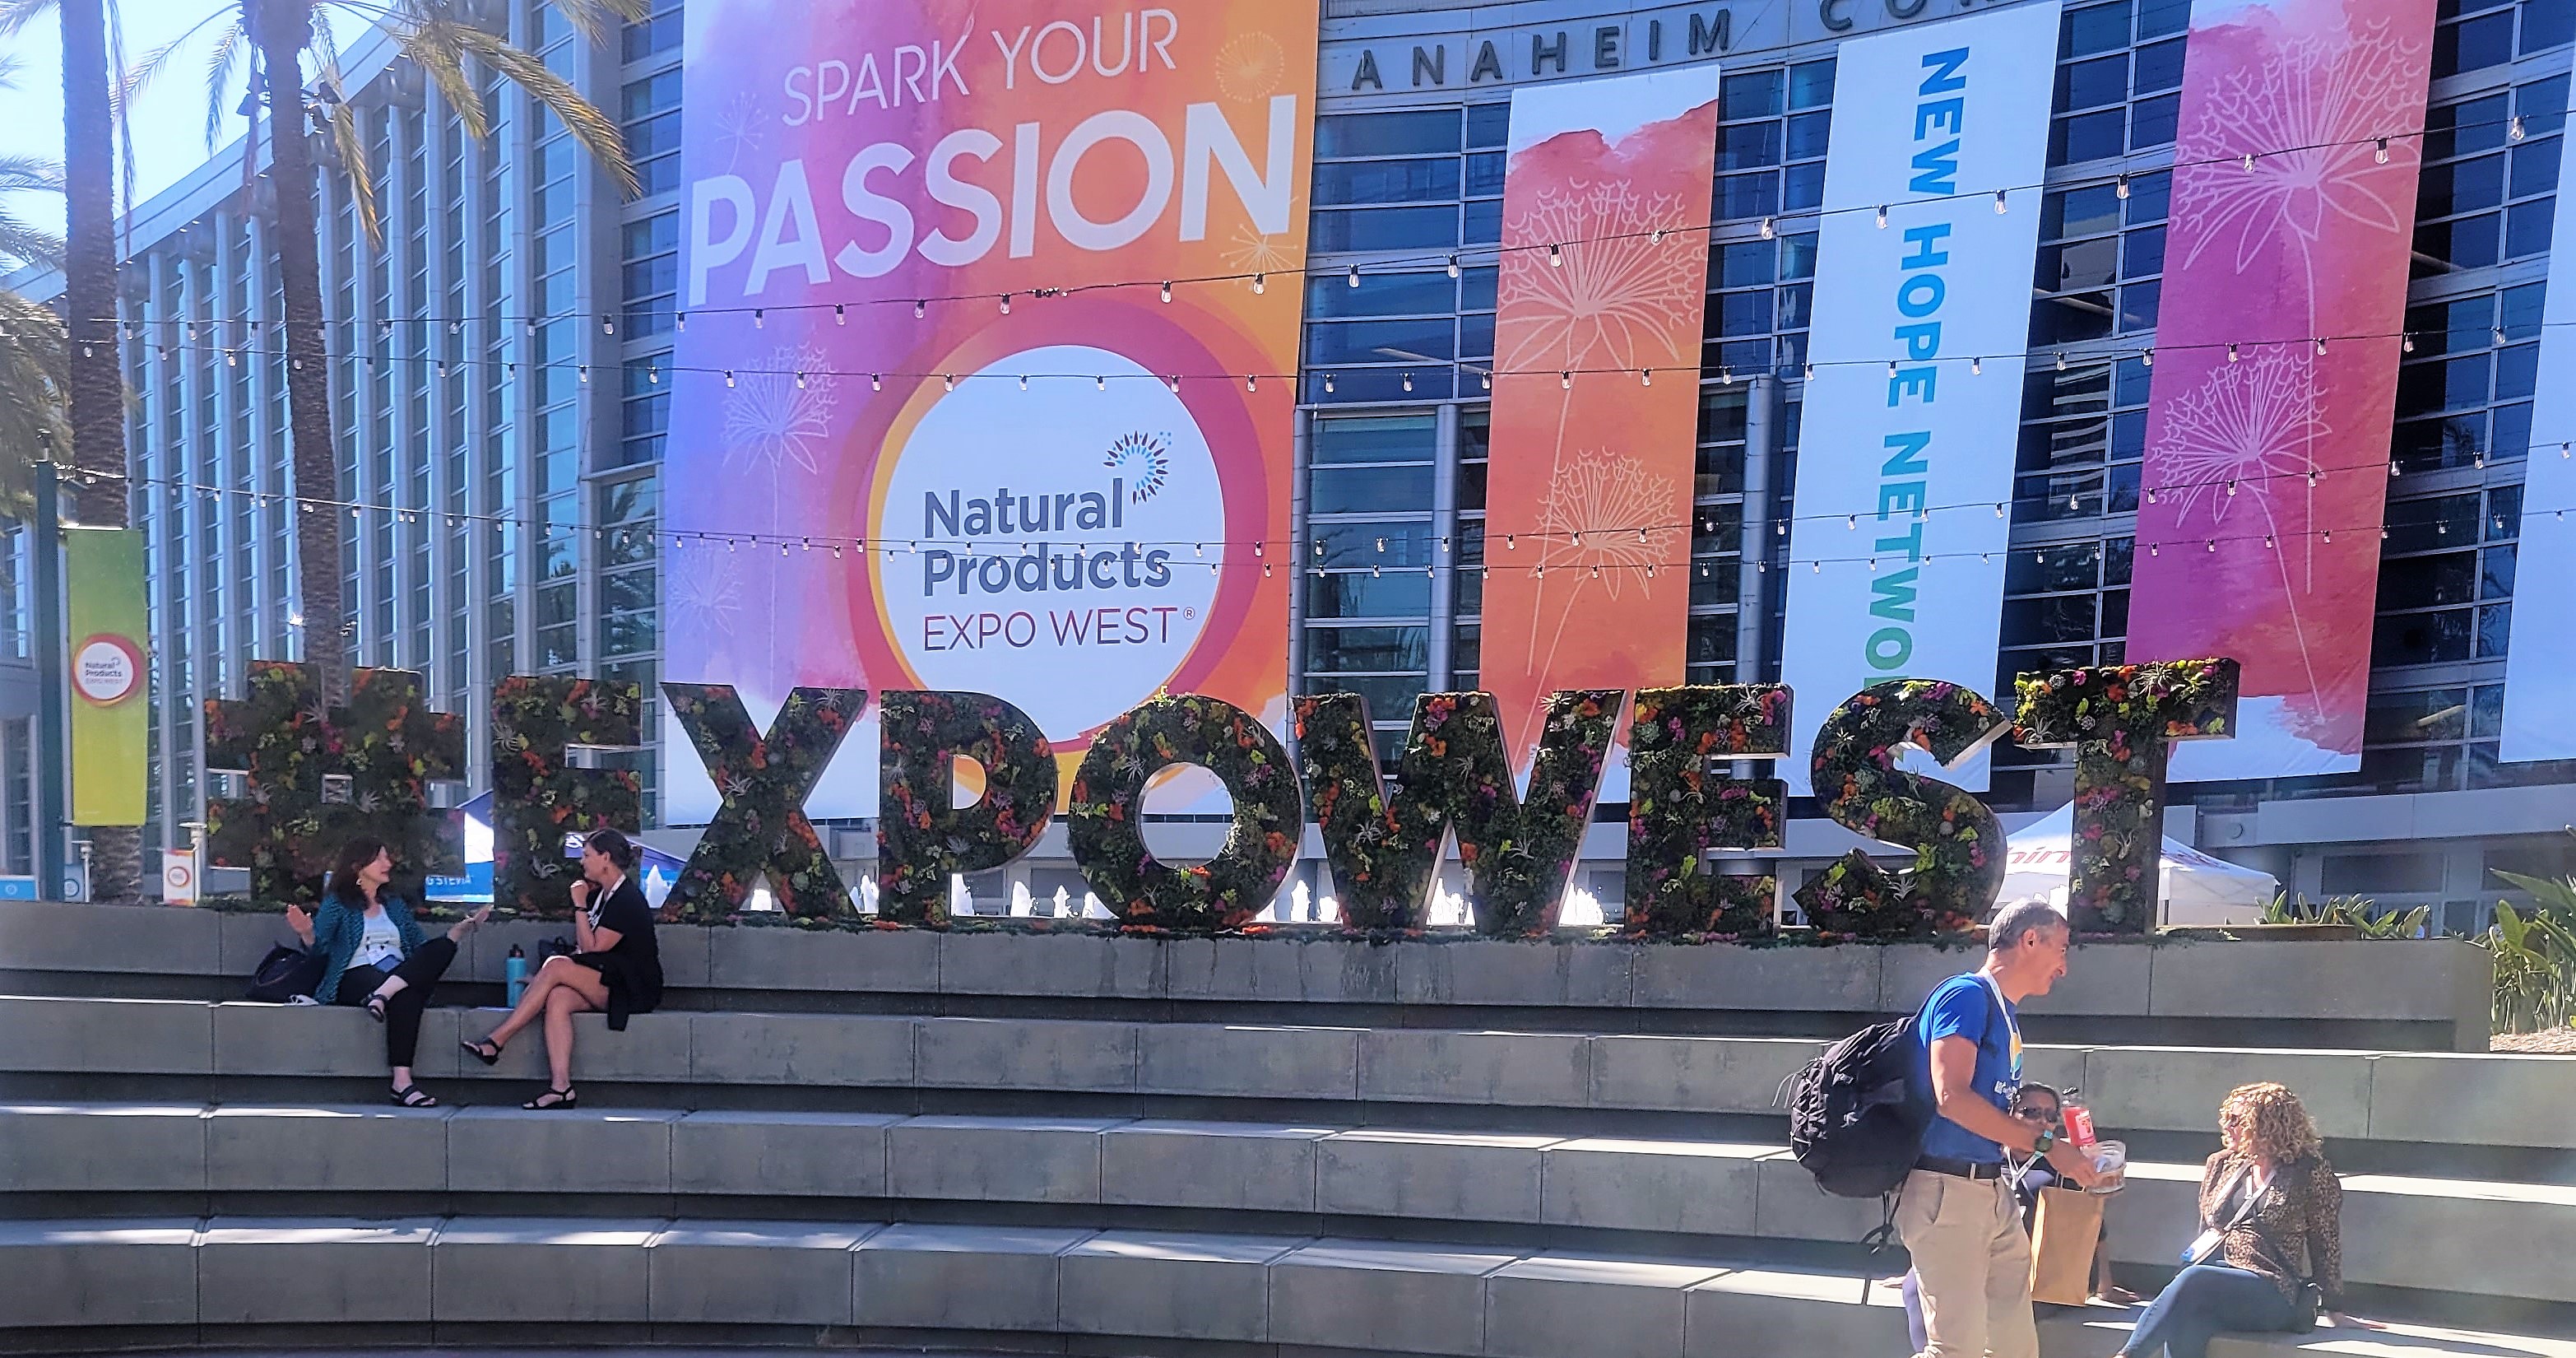 natural expo west